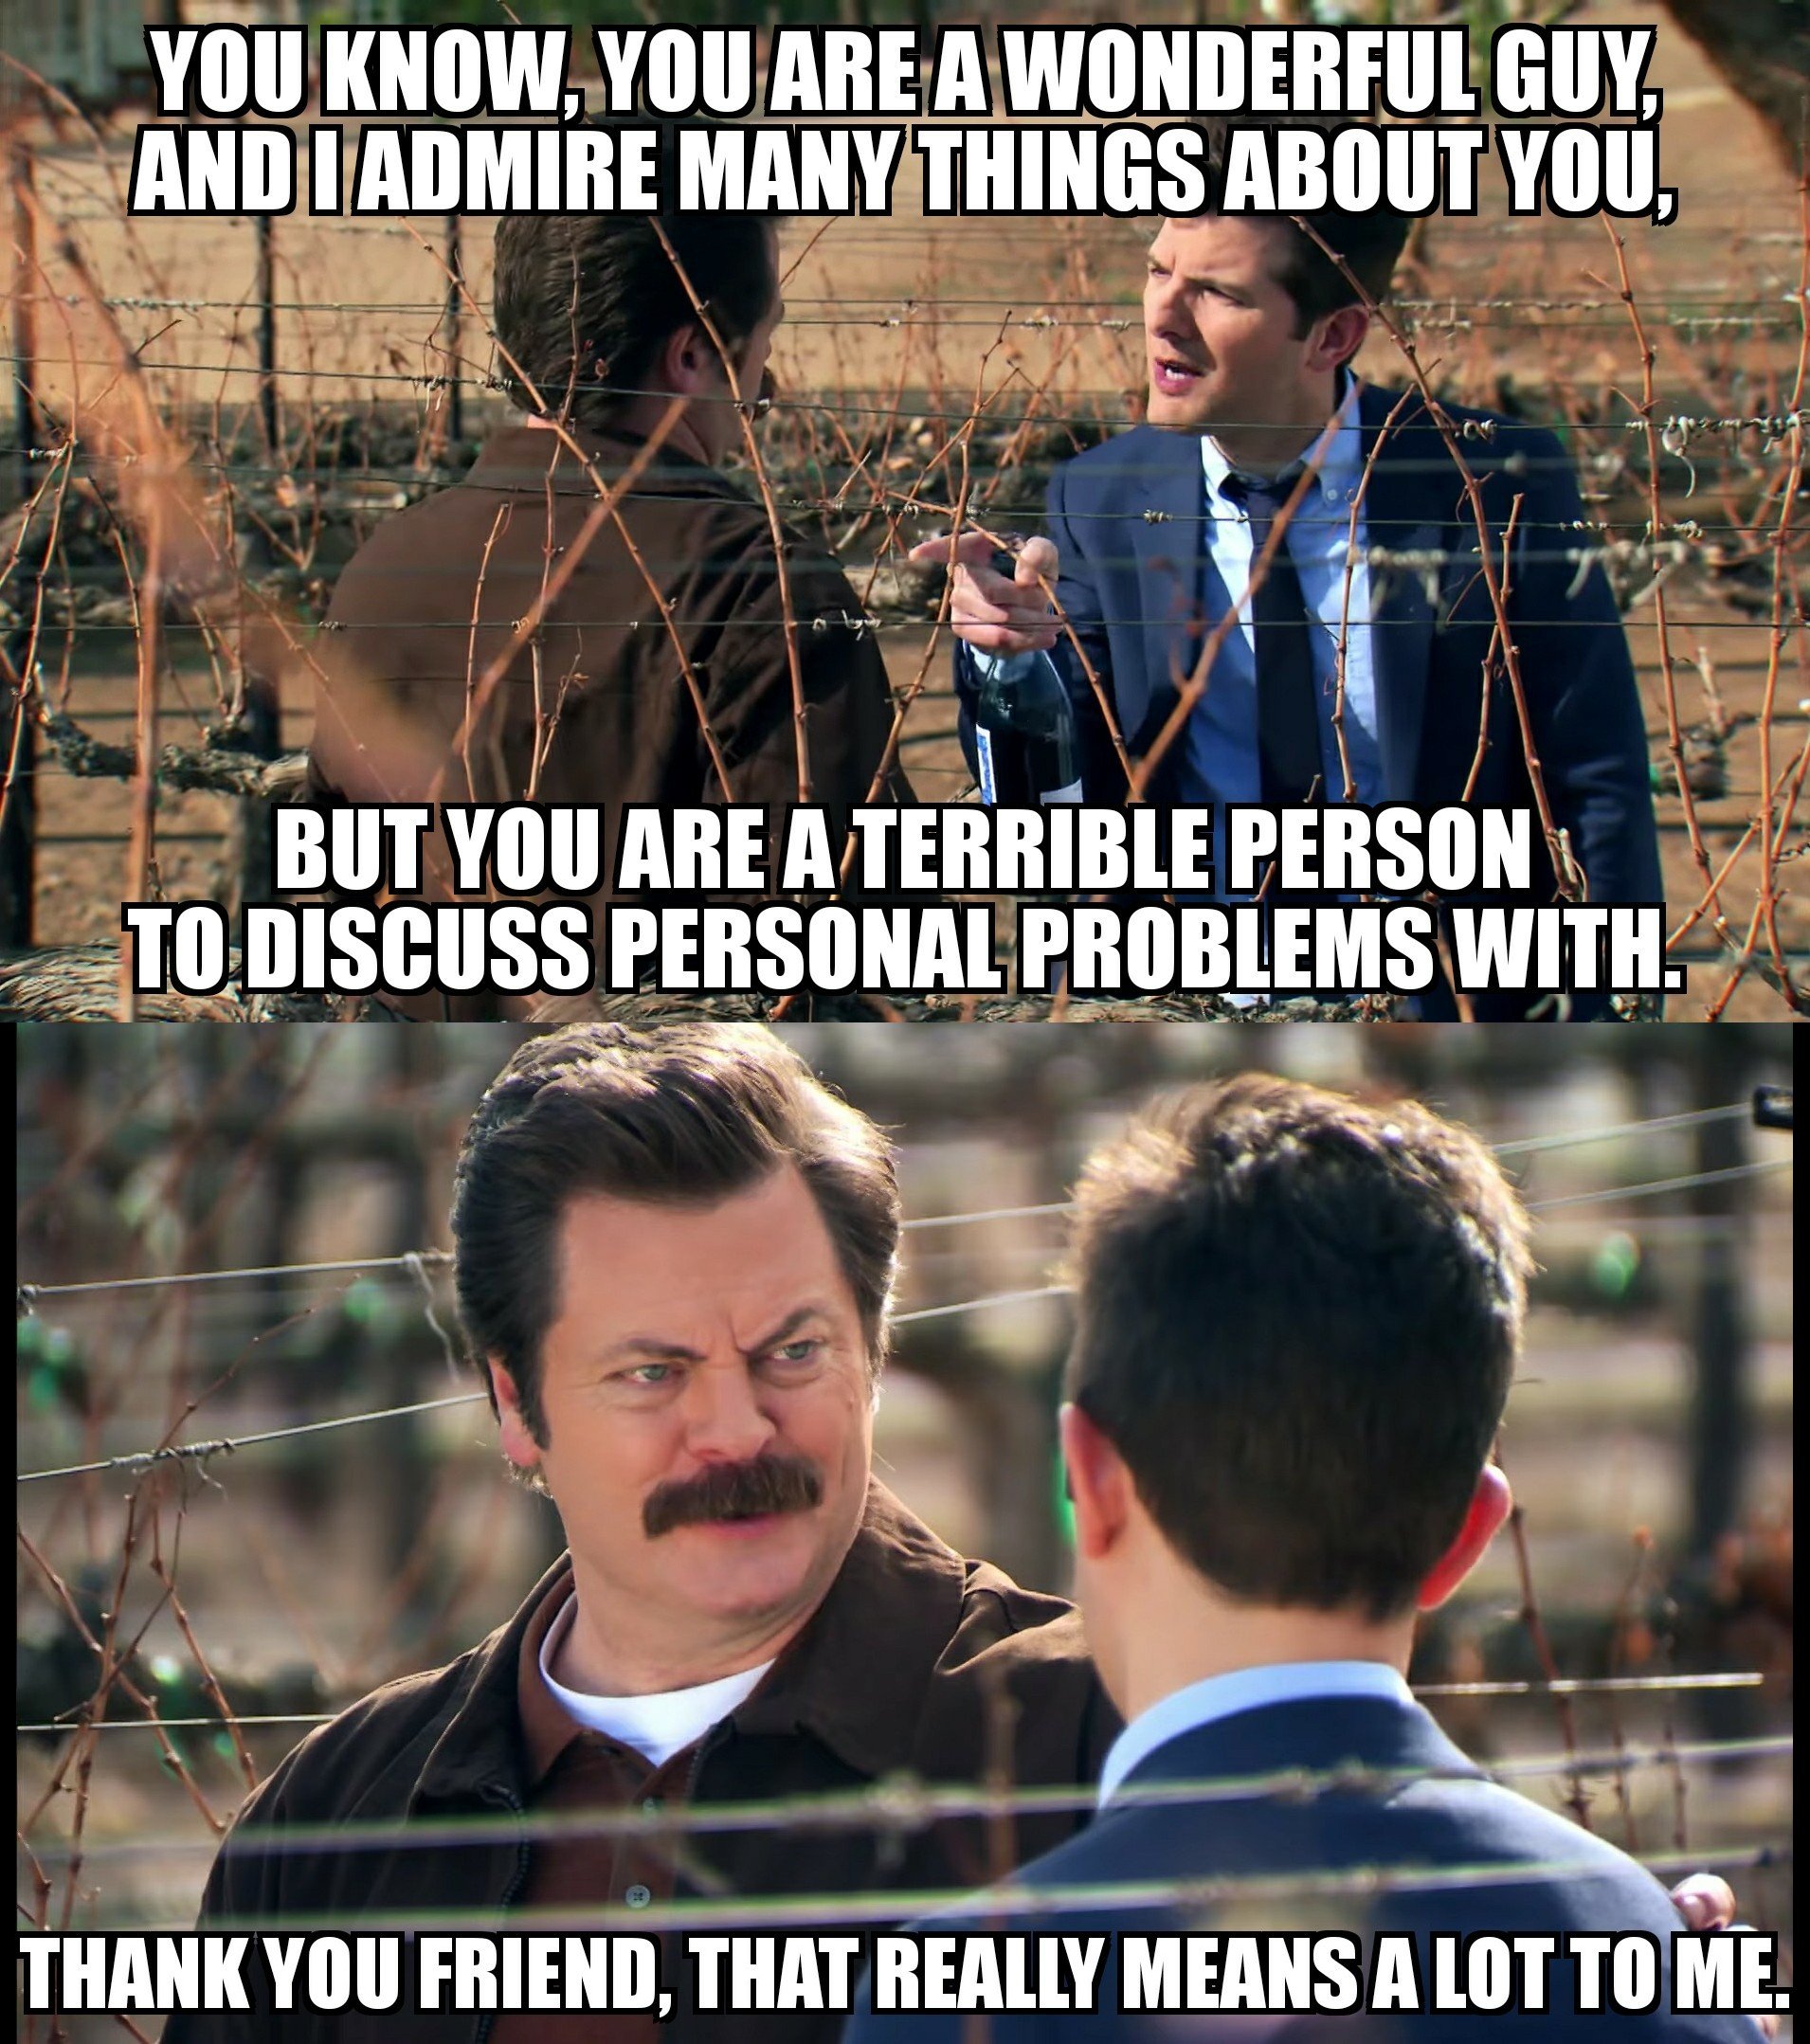 random reddit ron swanson memes - You Know, You Are A Wonderful Guy, And Iadmire Many Things About You, But You Are A Terrible Person To Discuss Personal Problems With Thank You Friend, That Really Means A Lot To Me.